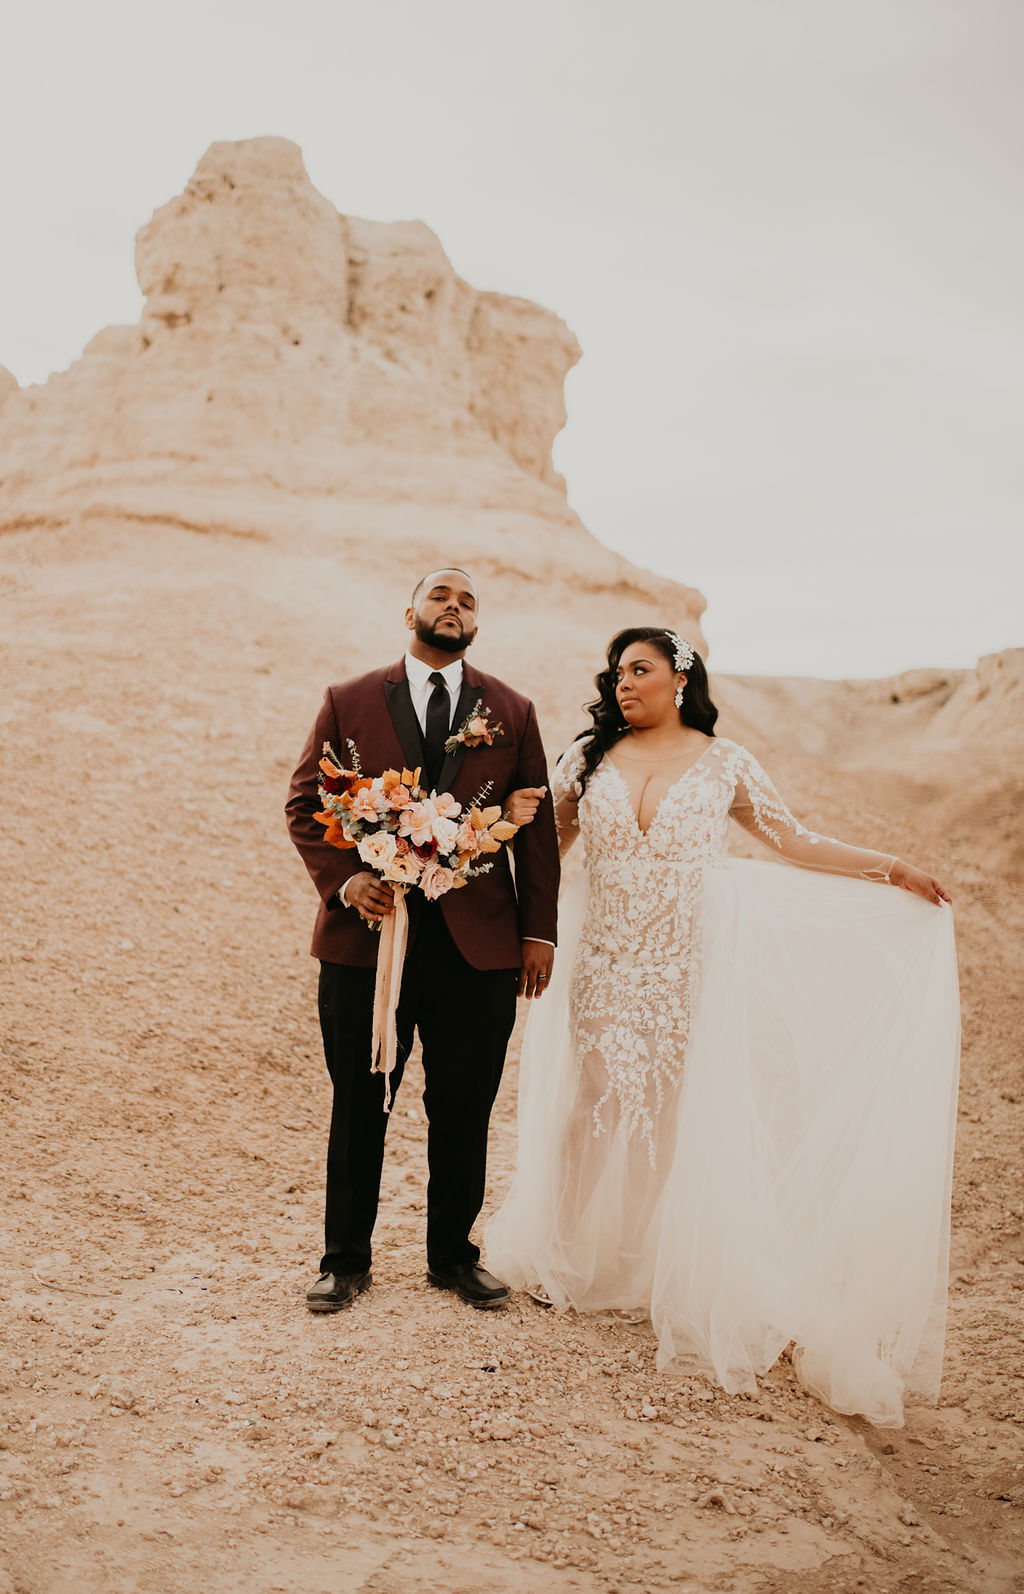 The beautiful bride holding out the tule of her wedding dress while holding the groom in front of the rocks in the desert of the fossil beds. 